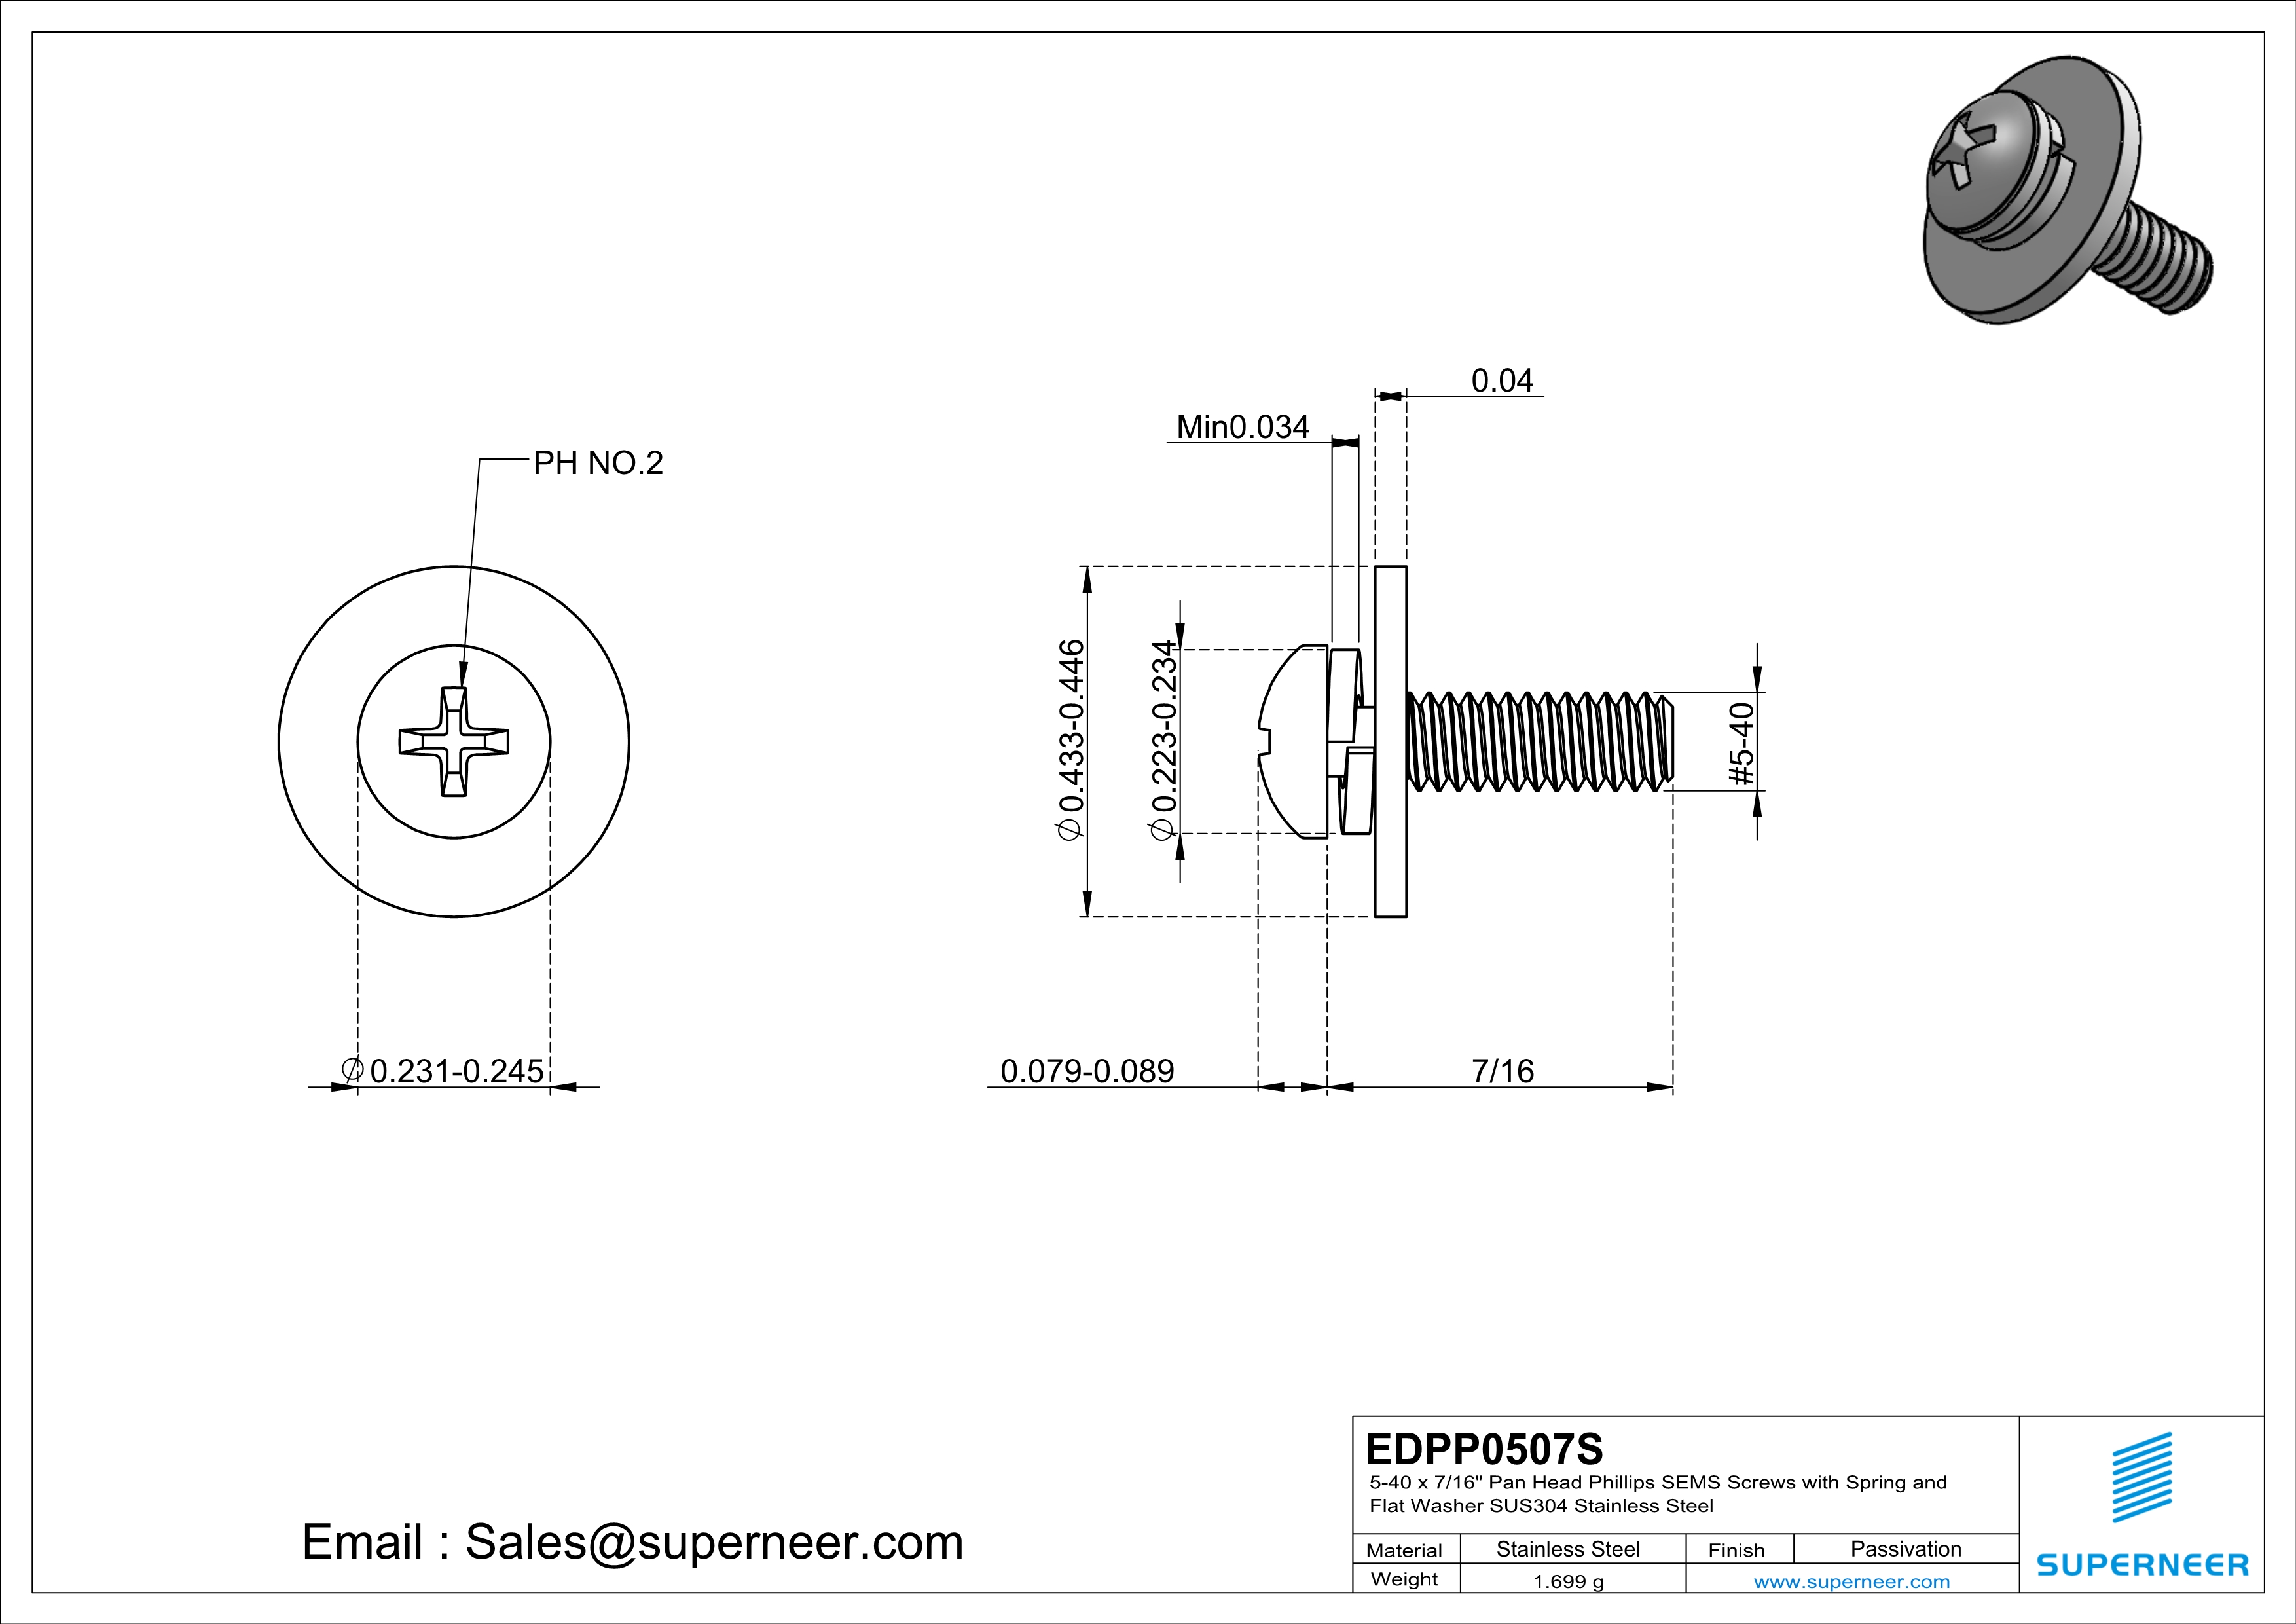 5-40 x 7/16" Pan Head Phillips SEMS Screws with Spring and Flat Washer SUS304 Stainless Steel Inox